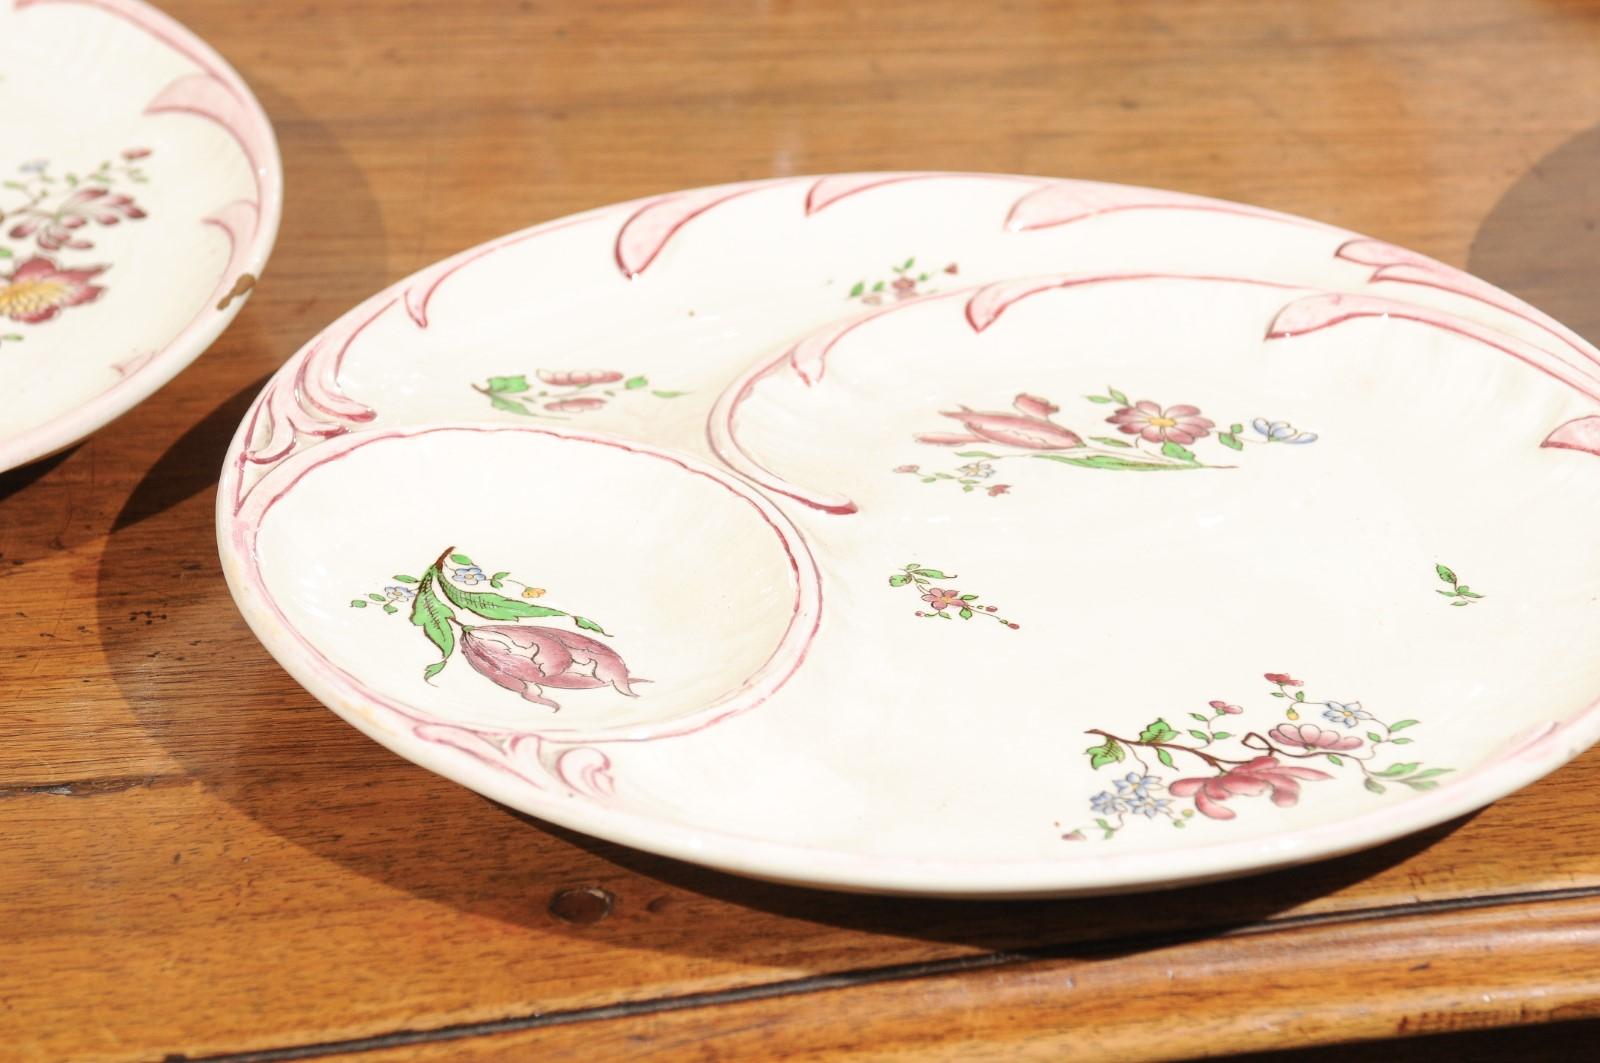 French 19th Century Sarreguemines Majolica Asparagus Plates with Pink Flowers For Sale 6